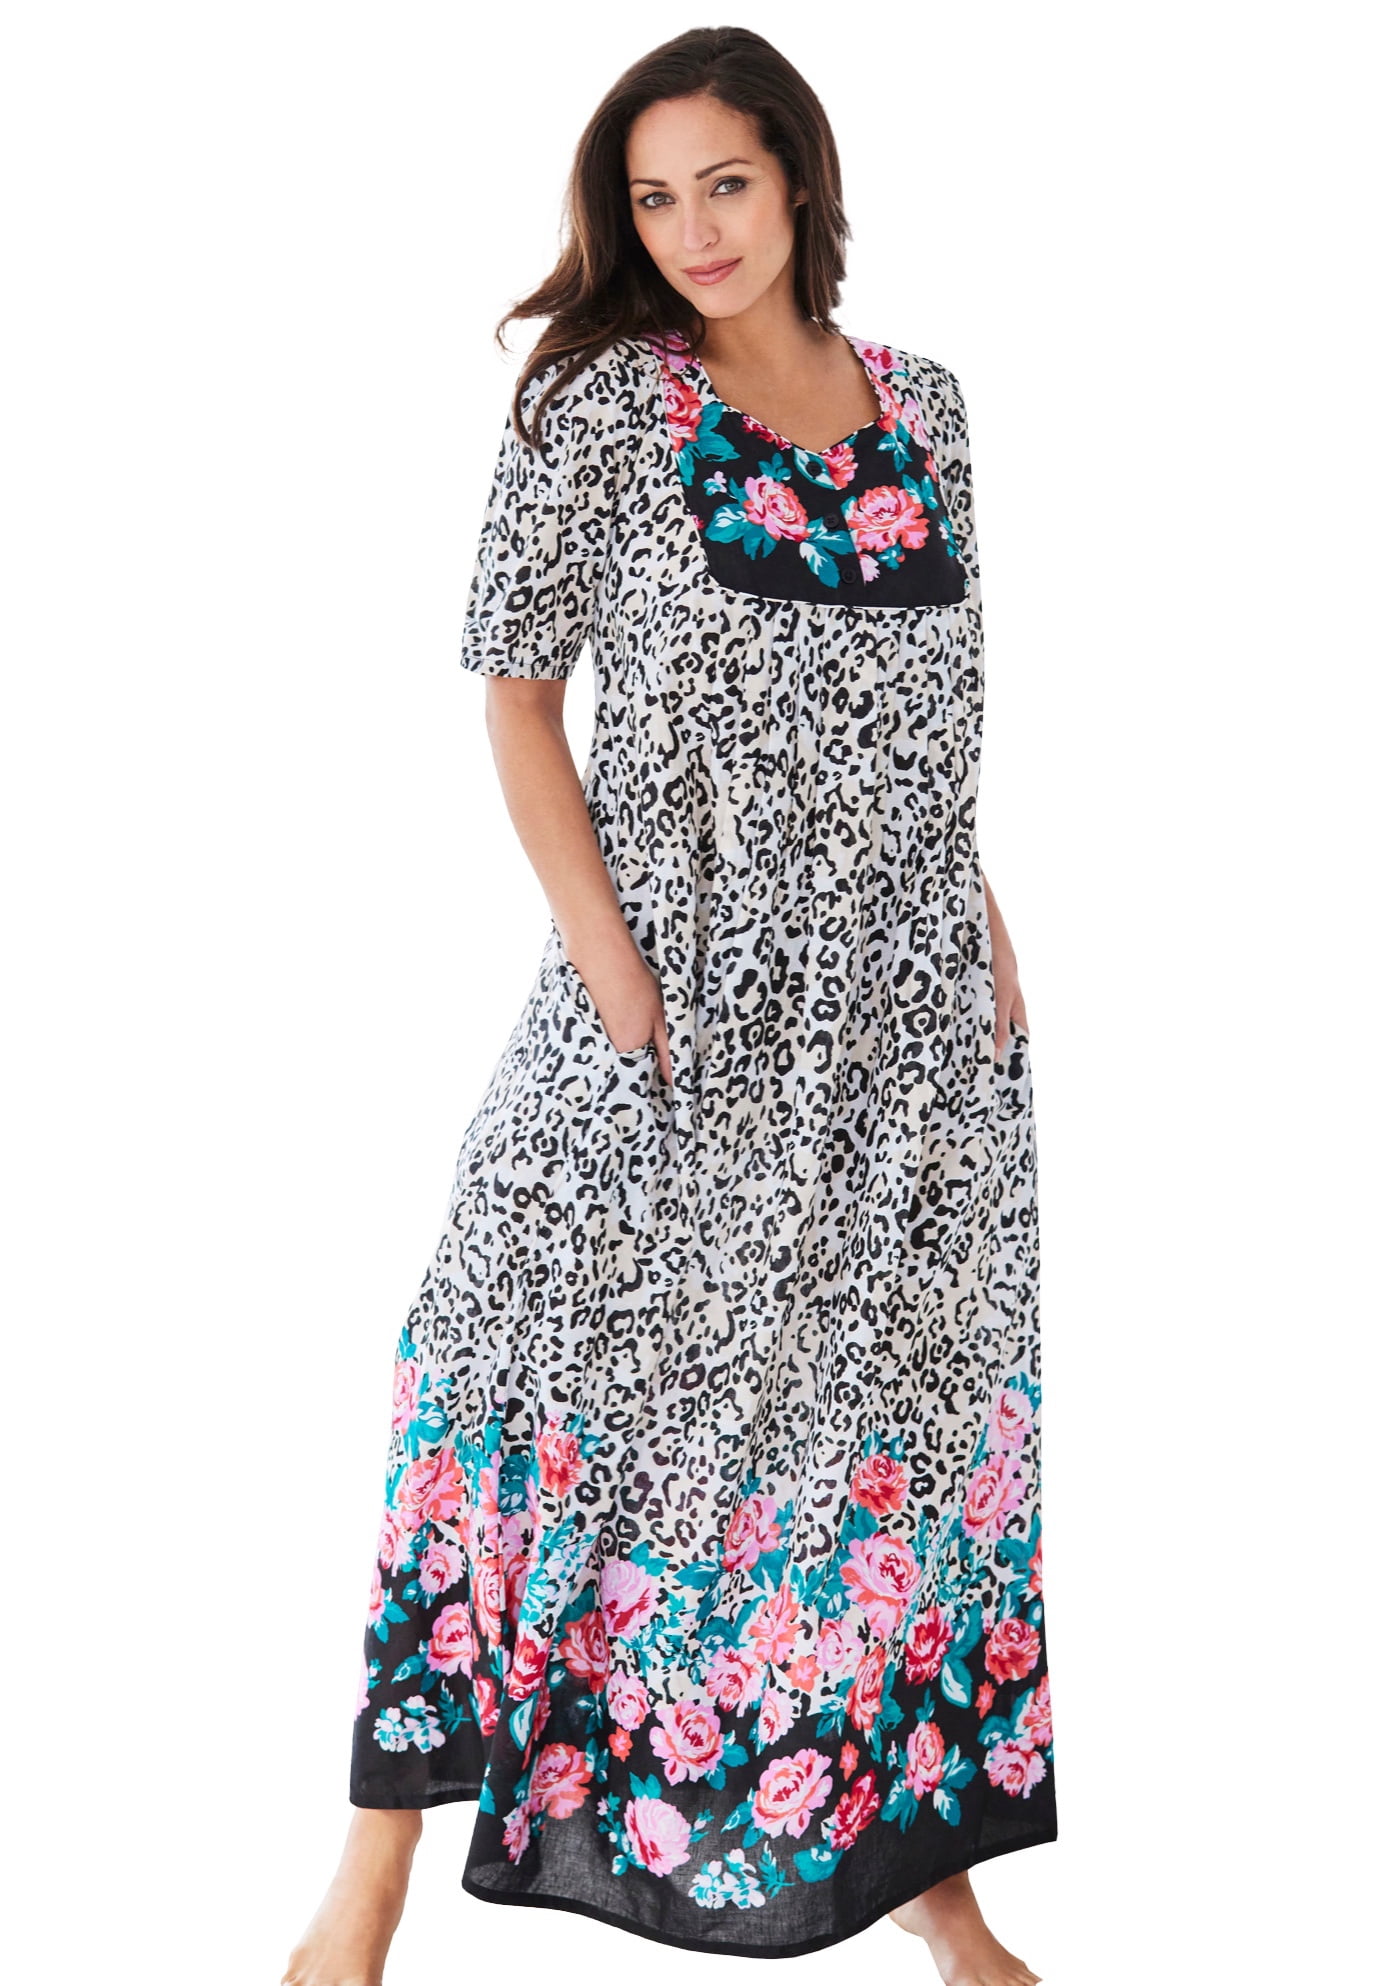 Only Necessities Women's Plus Size Petite Bib Front Dress or Nightgown ...